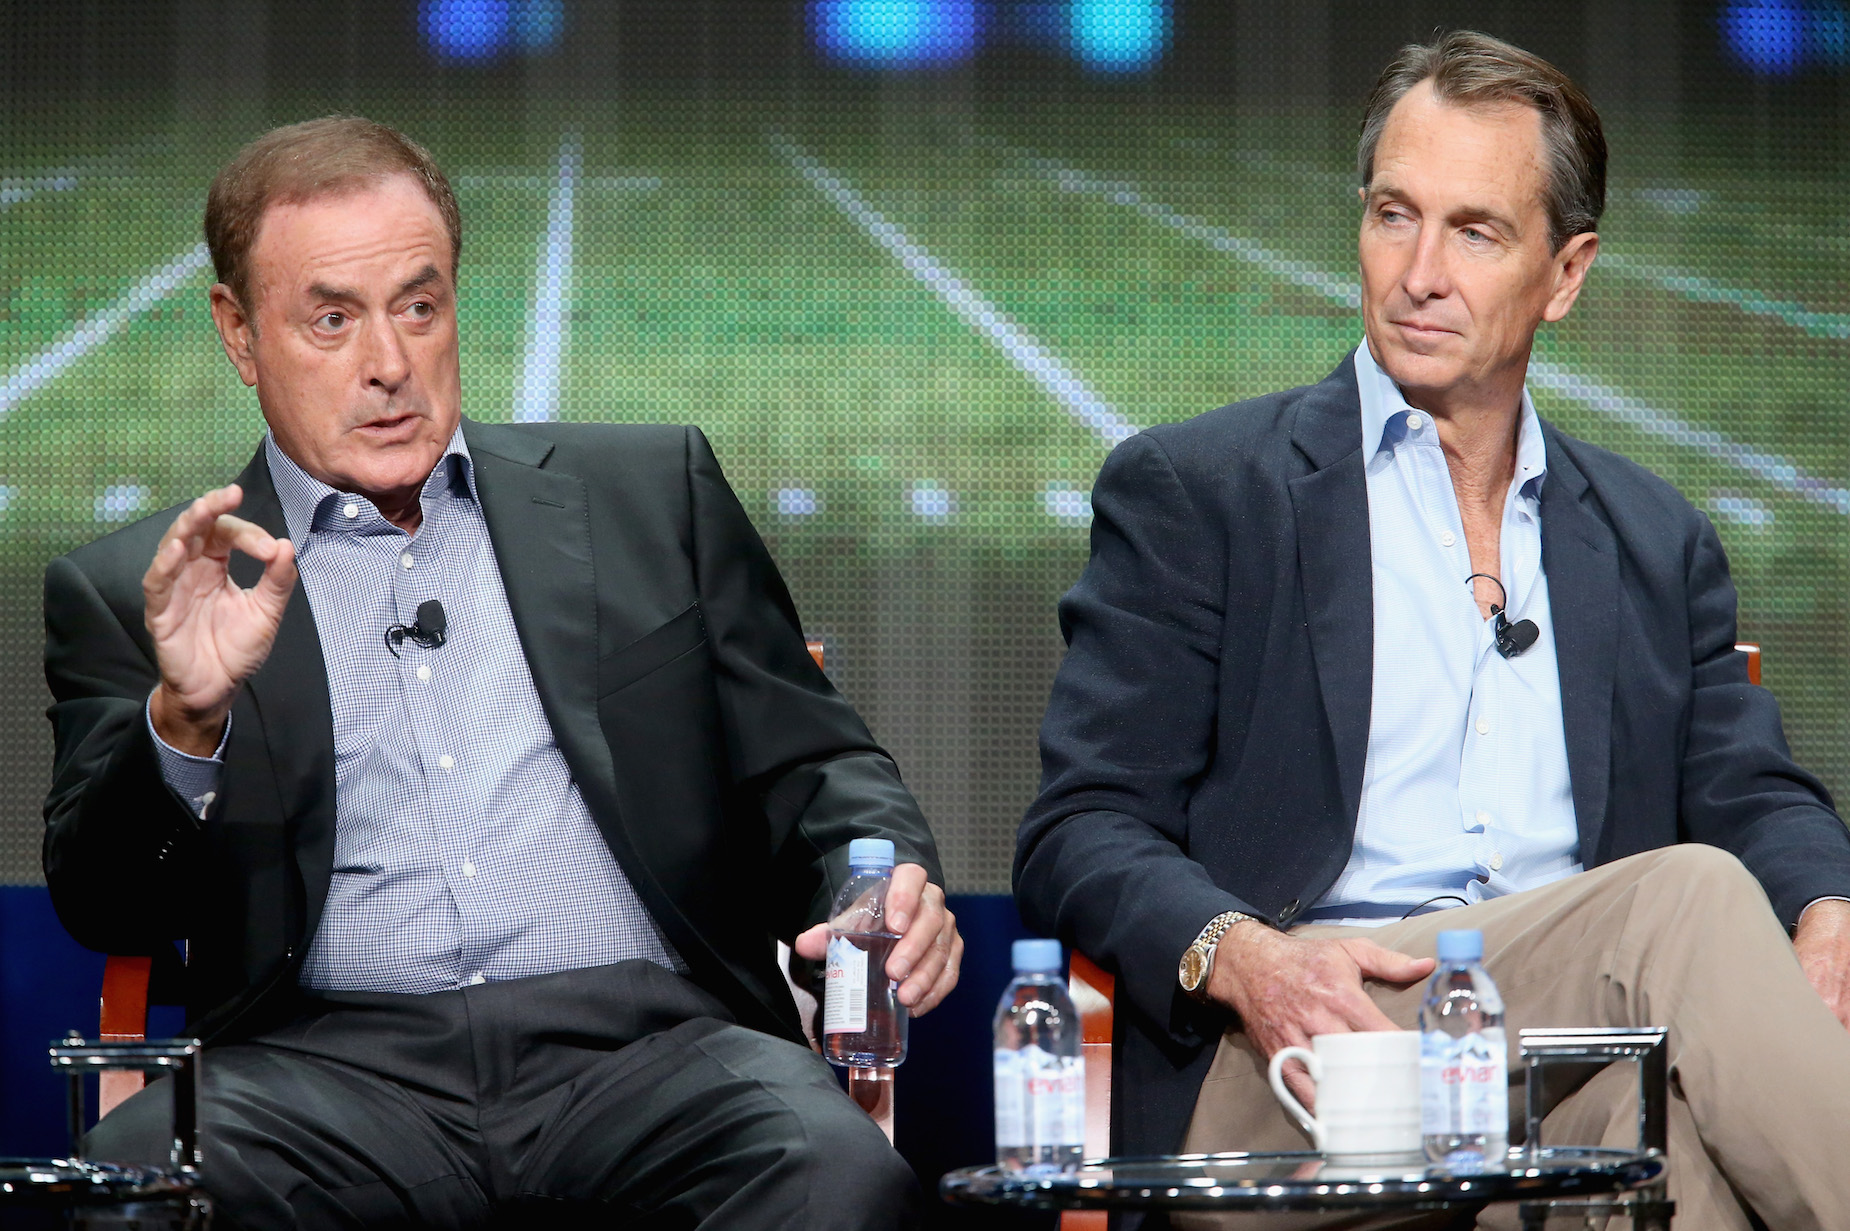 Al Michaels apparently eats an entire dinner during Sunday Night Football, according to Cris Collinsworth.